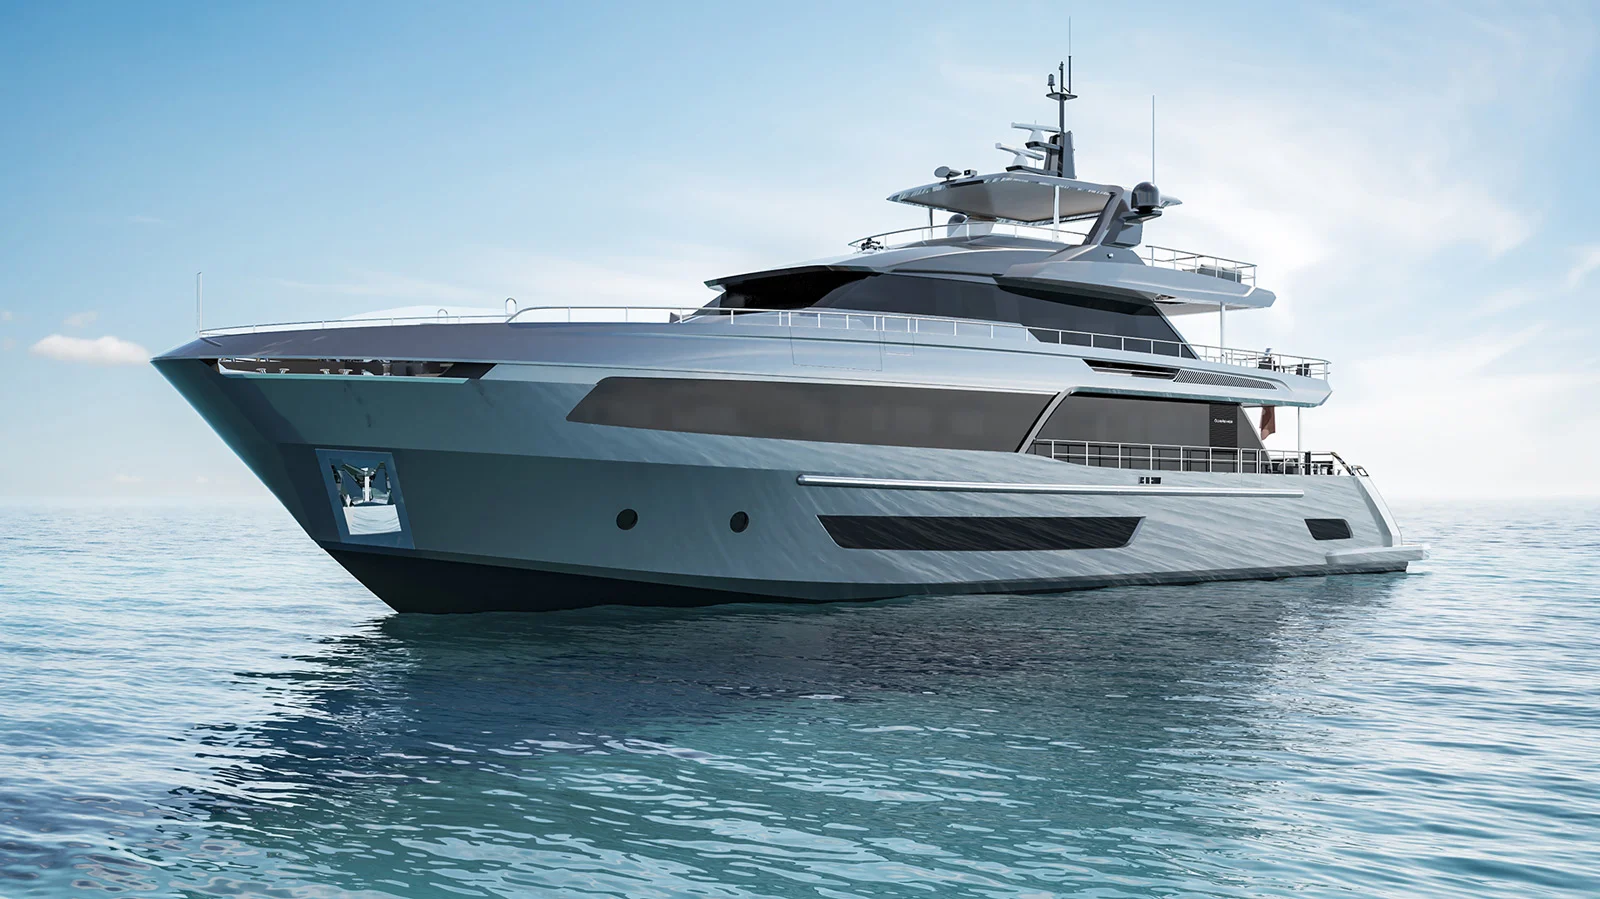 Ocean Alexander 35P is going to be the first in a new yacht series developed for the global market